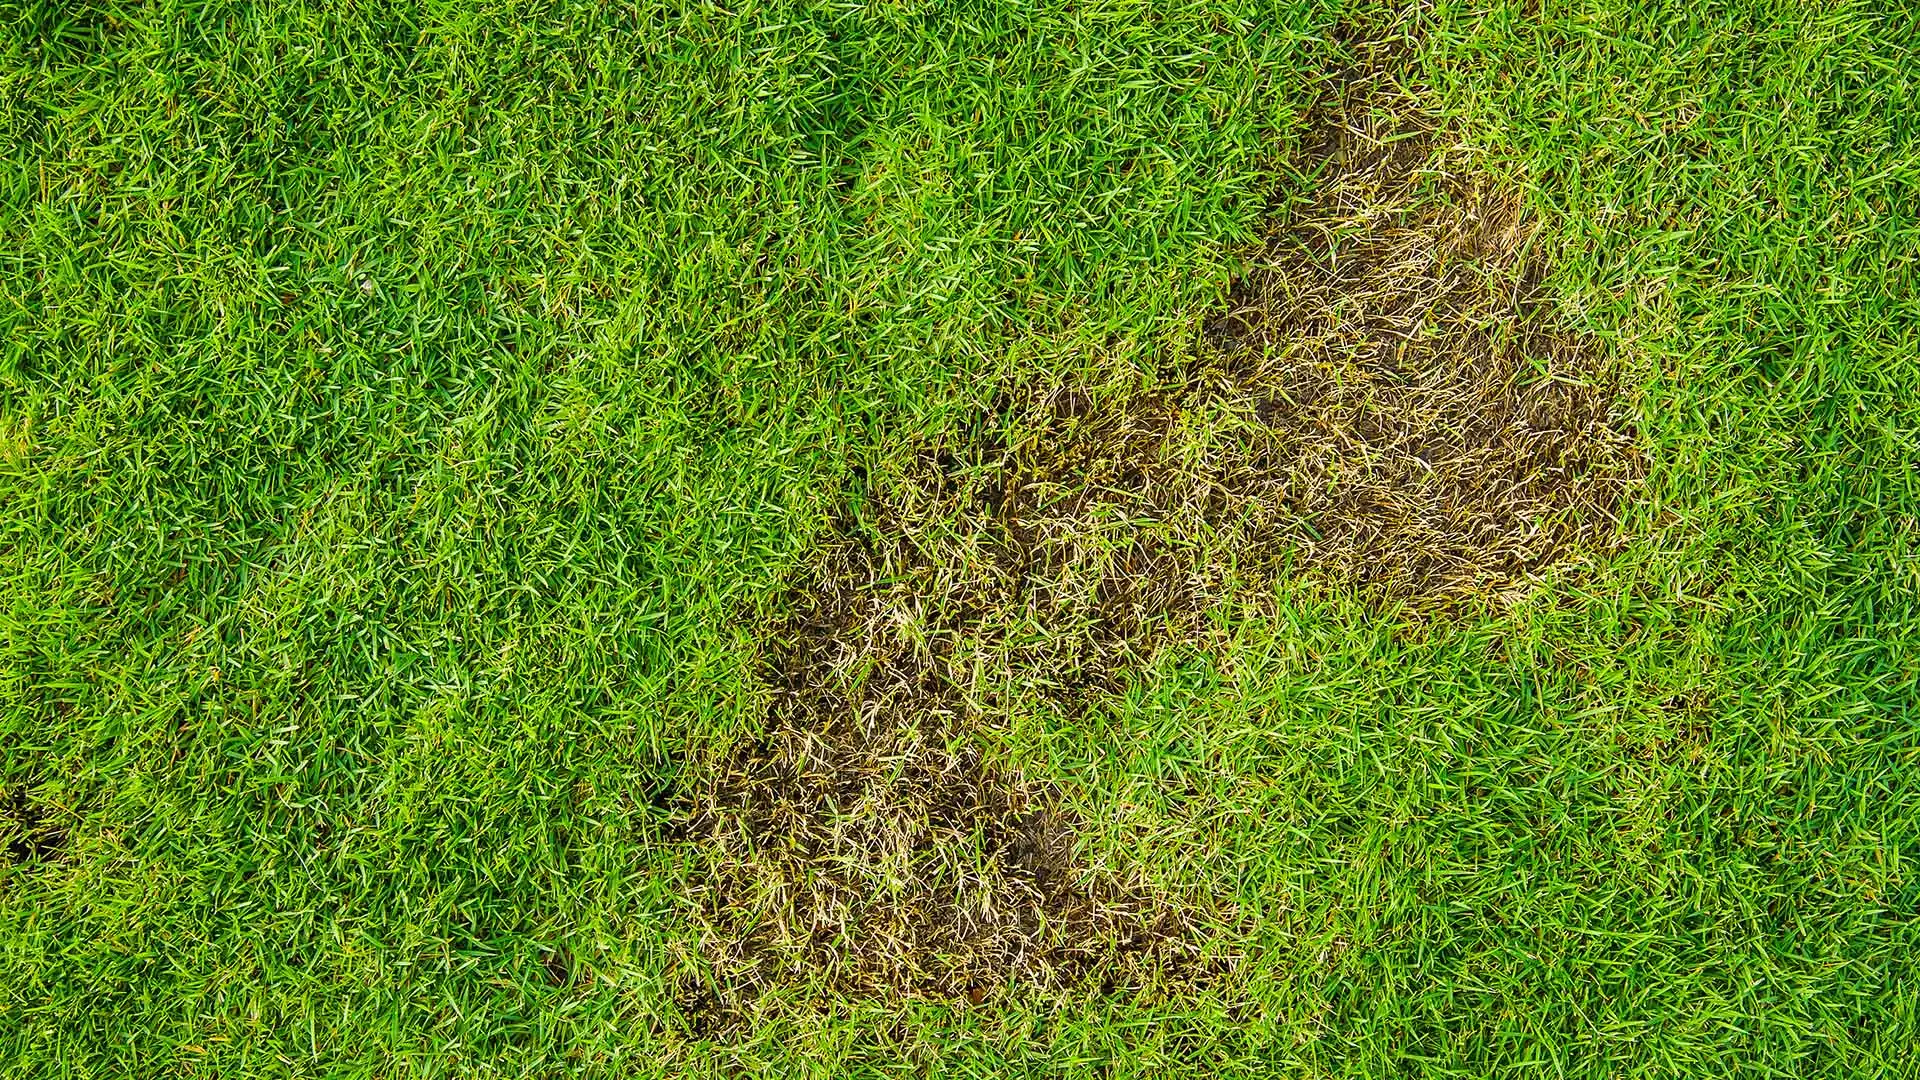 4 Signs That Likely Indicate Your Lawn Is Infested With Grubs